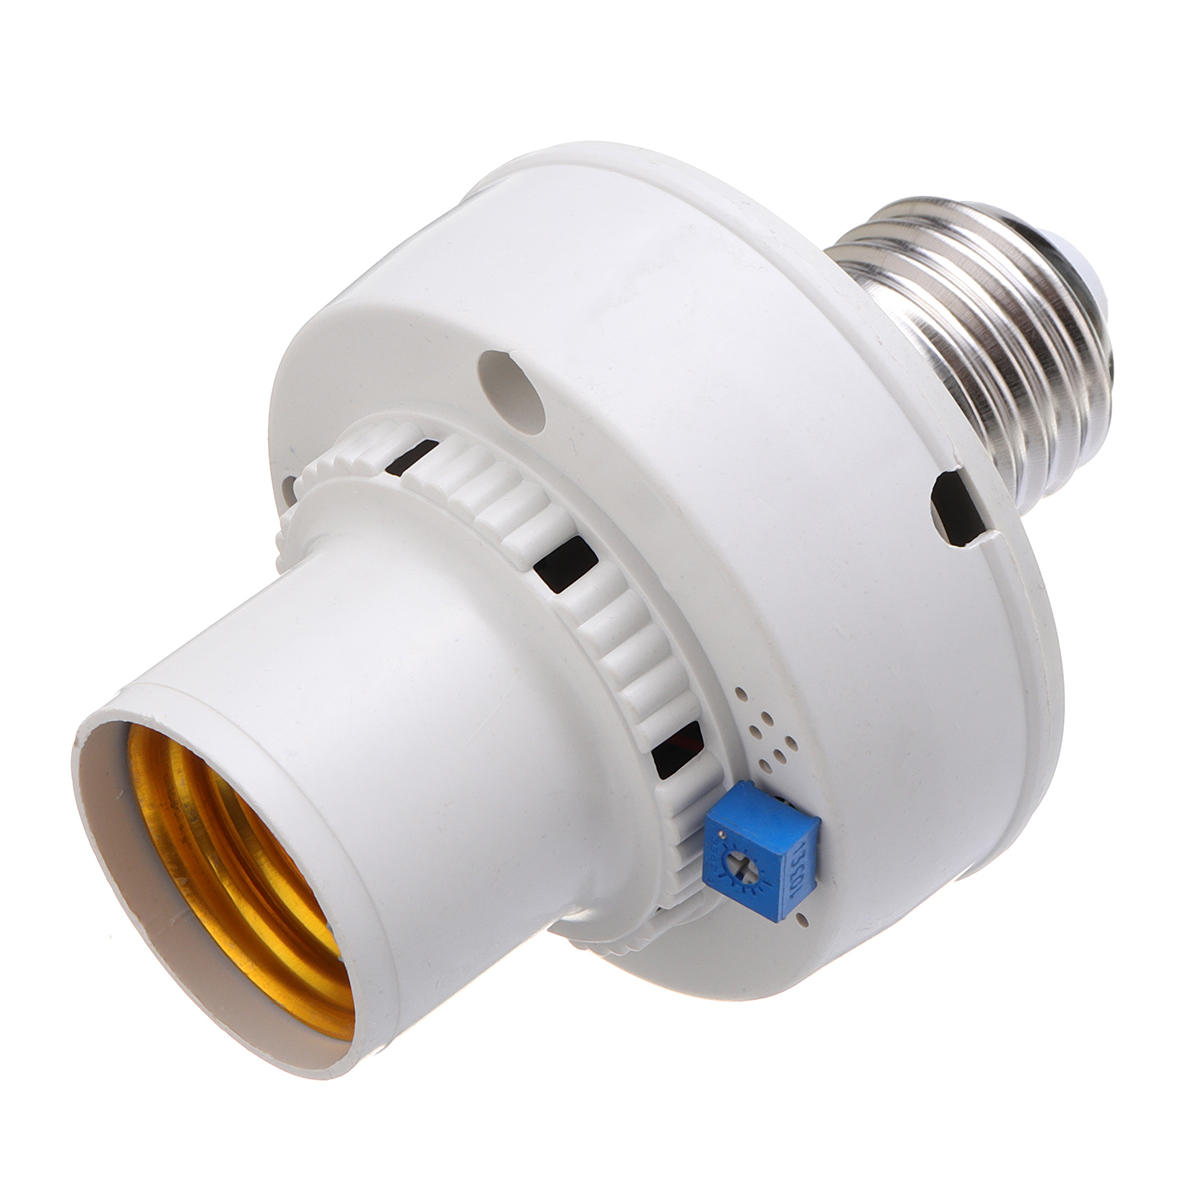 AC220V 100W E27 Sound-controlled Clap Turn On Off Bulb Adapter Light Socket For LED CFL Light